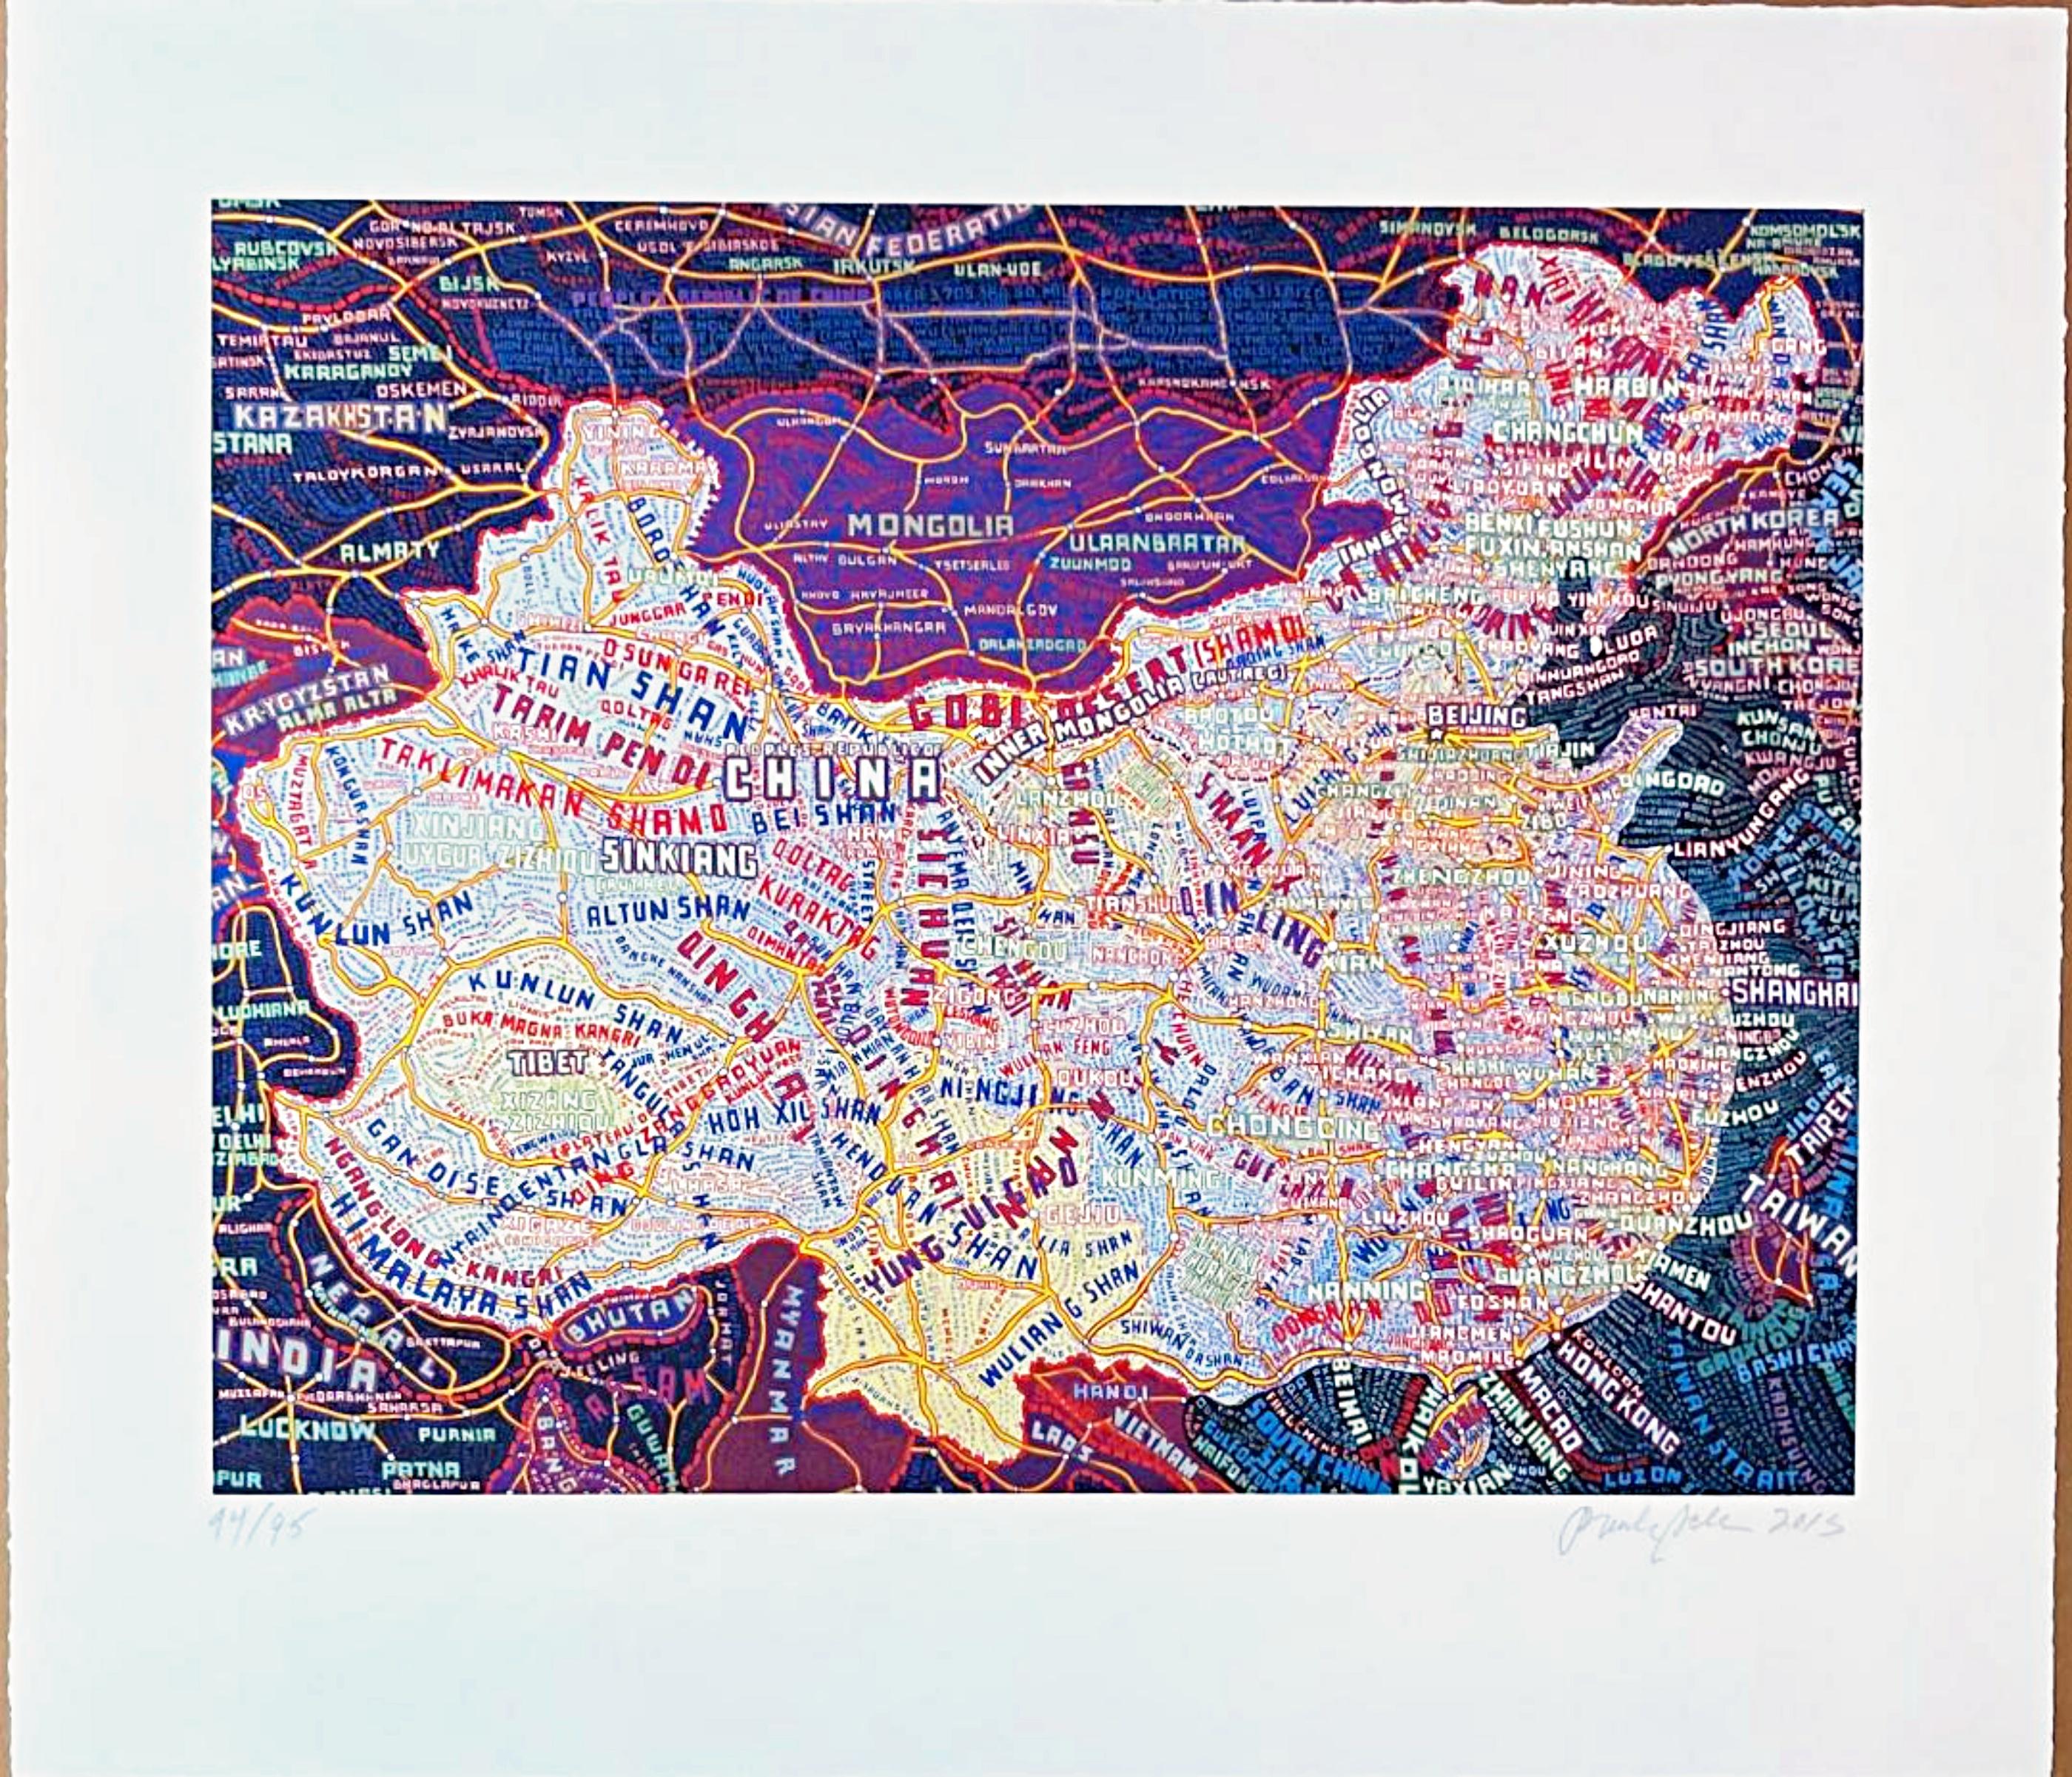 China (gorgeous silkscreen on lanaquarelle from renowned artist's map series)  - Print by Paula Scher